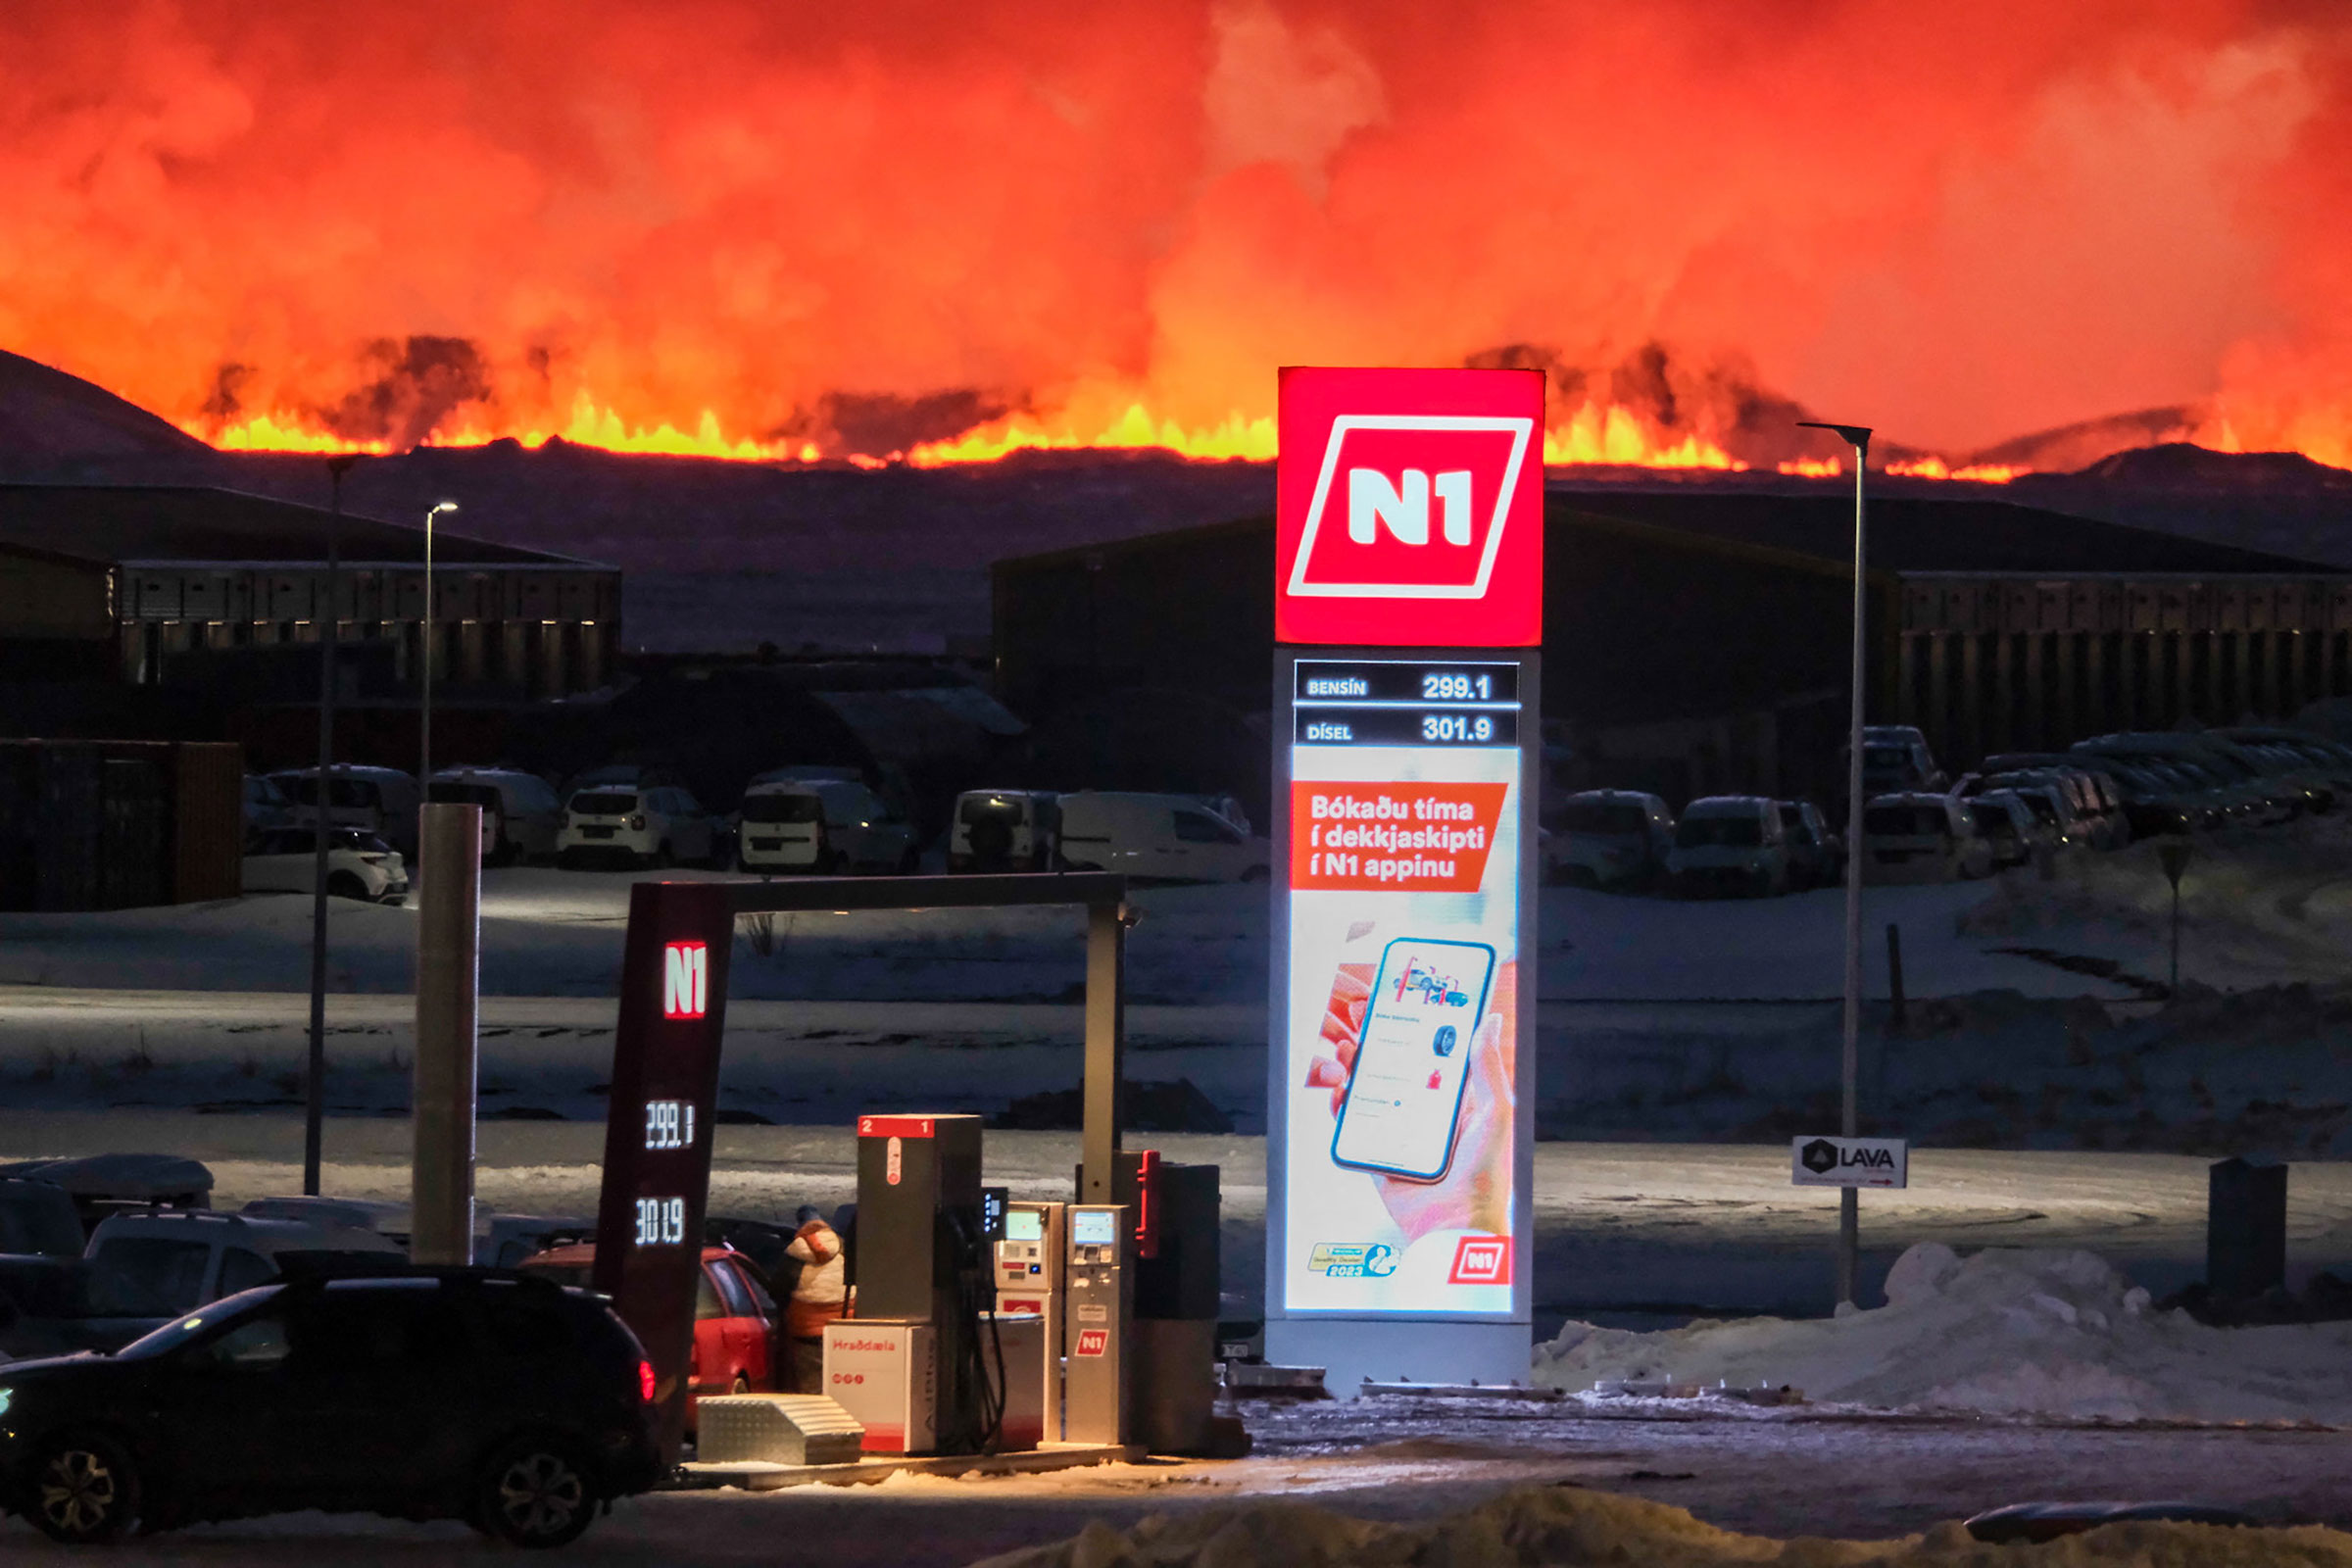 People fill up their vehicles at a petrol station as lava and billowing smoke pours out of a fissure during a volcanic eruption near Grindavík